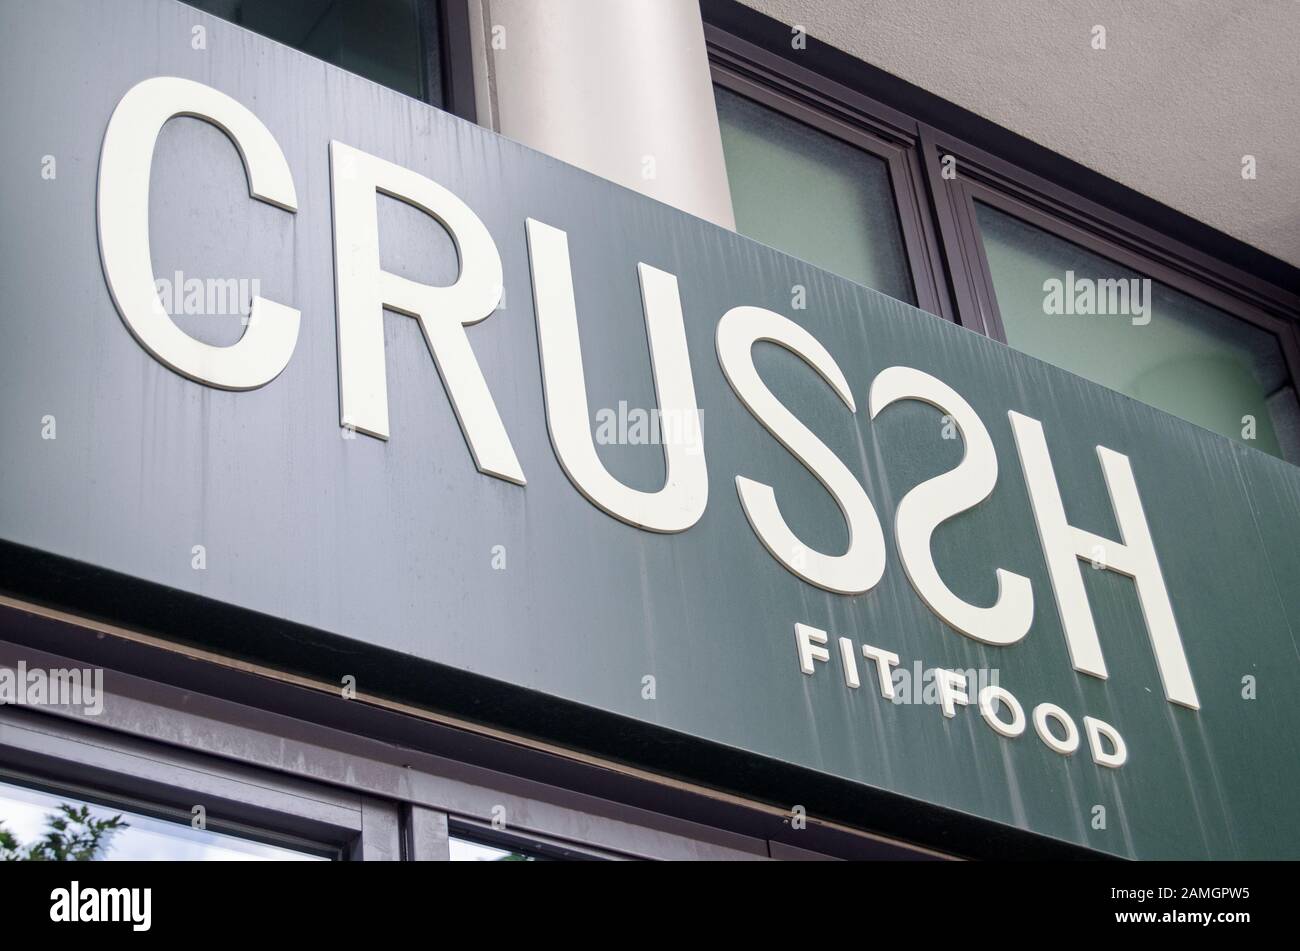 London, UK - July 20, 2019: Sign above the entrance to  Crussh fast food shop.  The retailer specialises in selling healthy fast food, smoothies and s Stock Photo